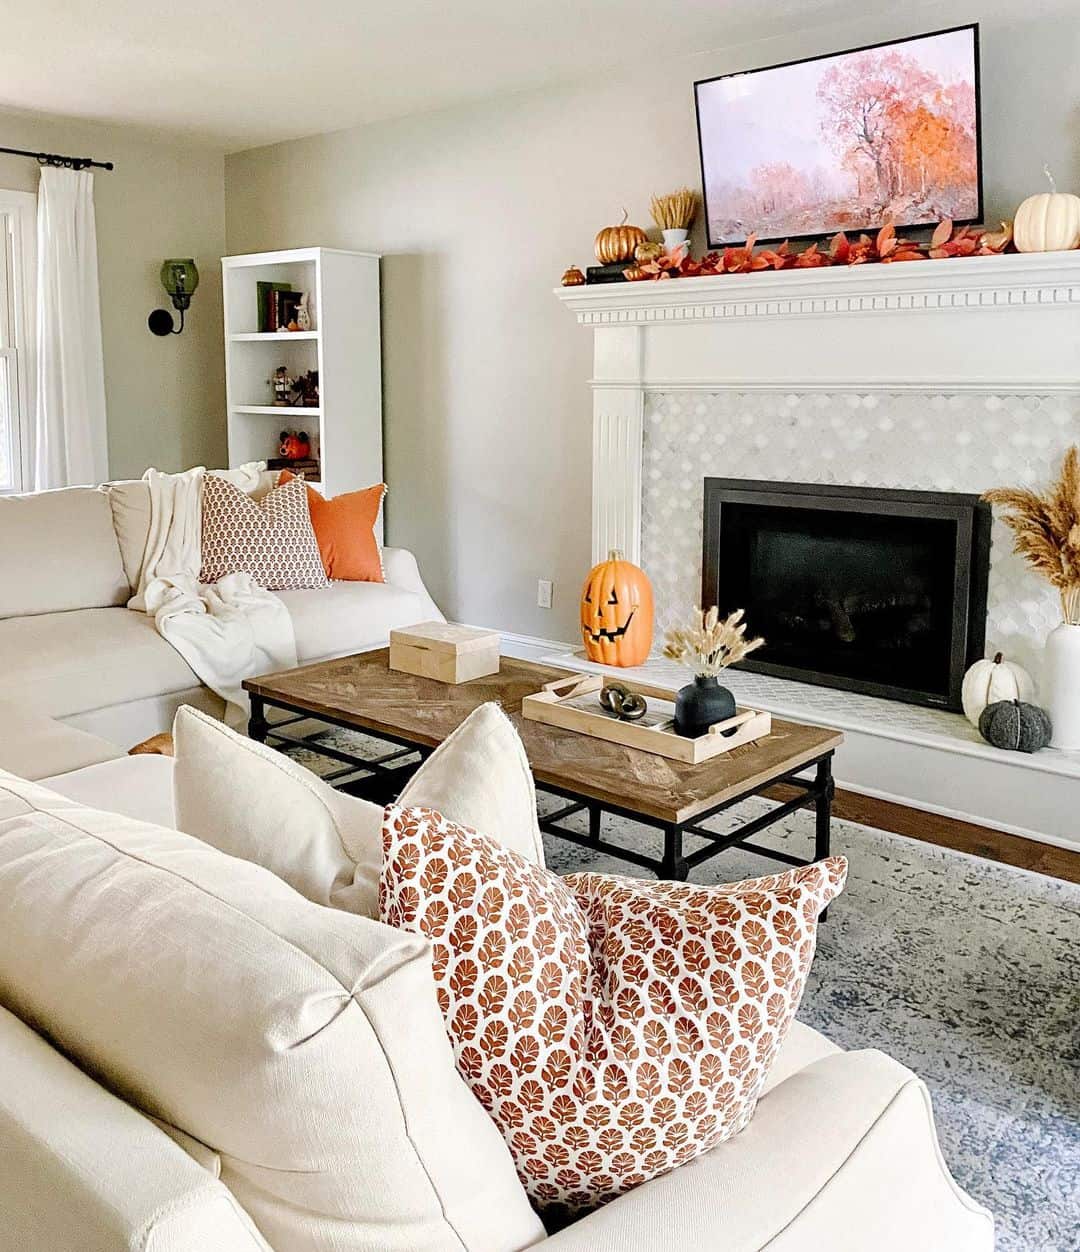 Tiled Fireplace Topped With Fall Ornaments - Soul & Lane